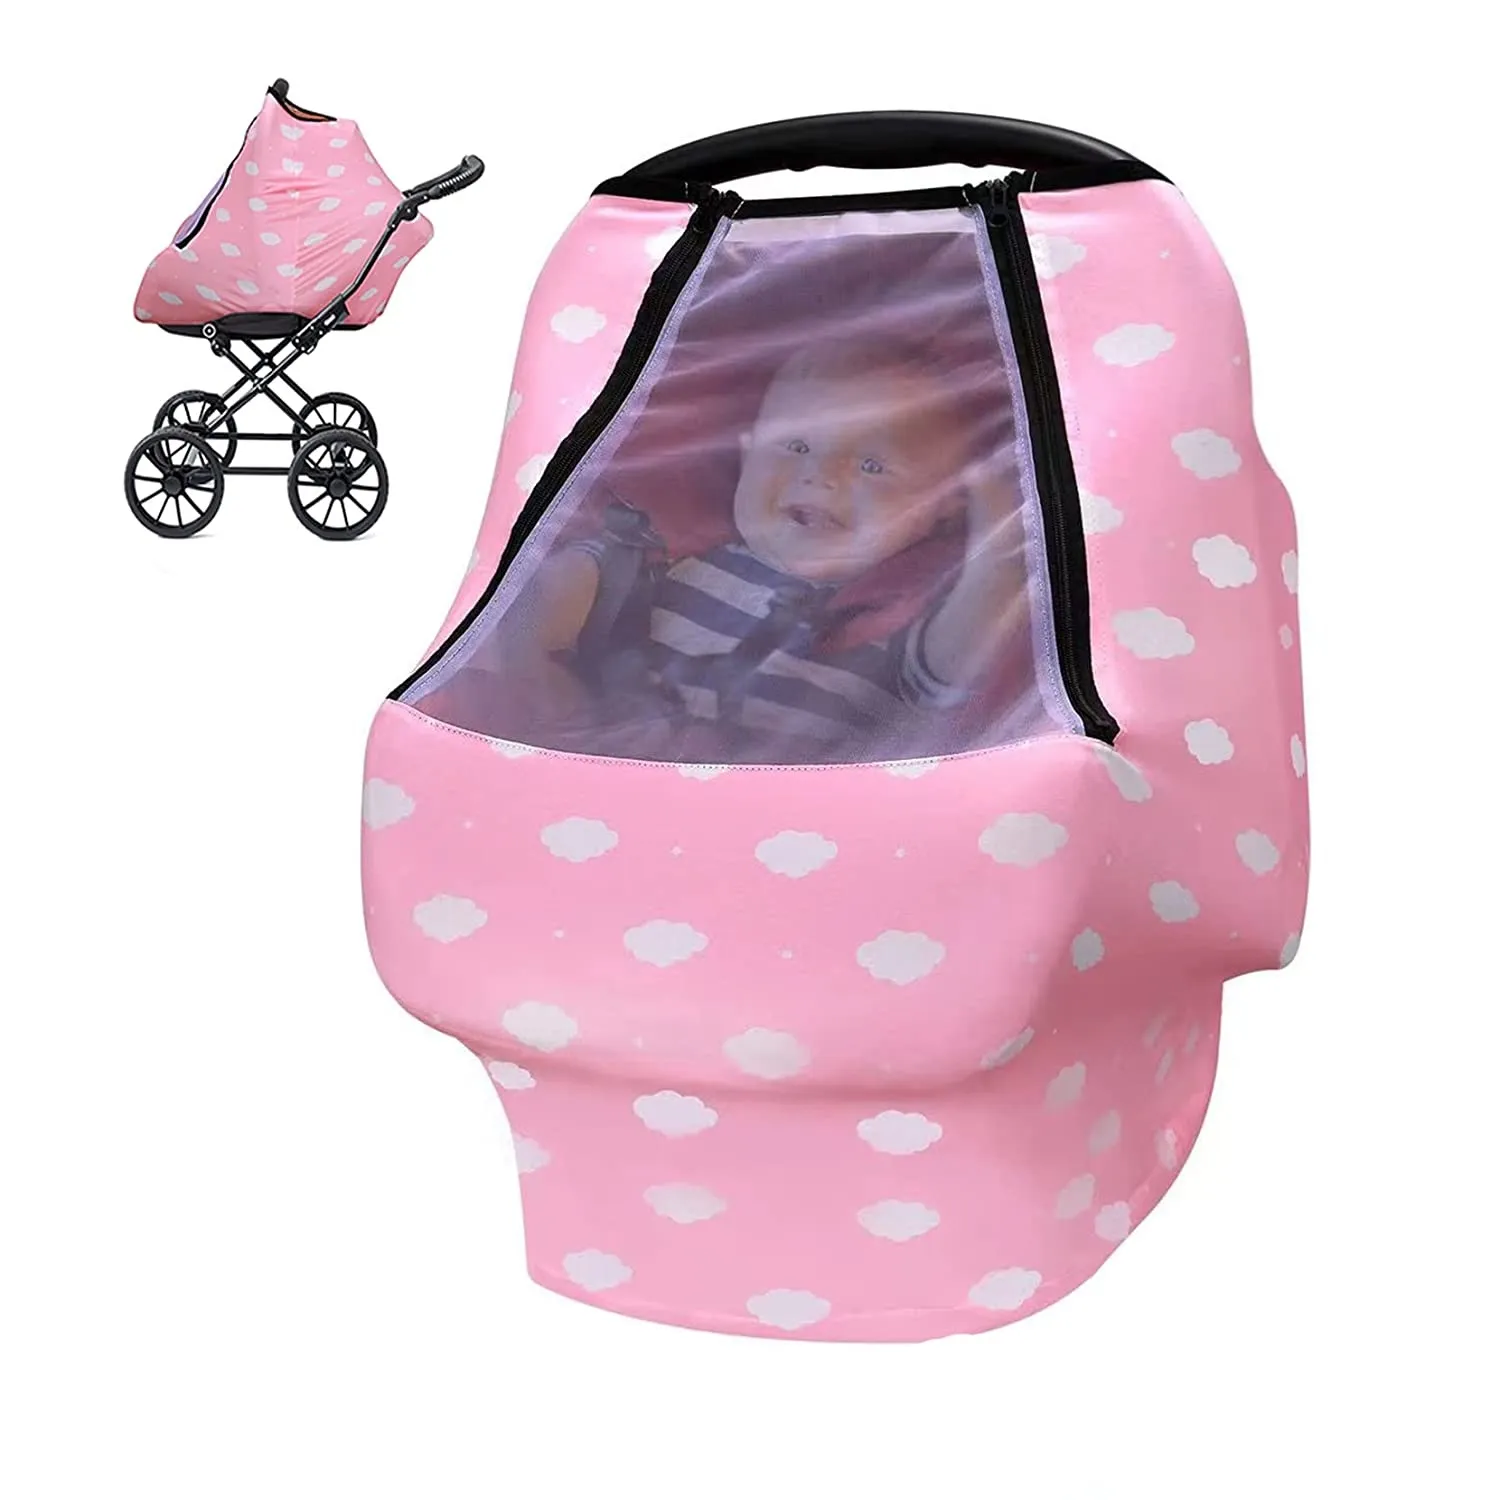 Baby Car Seat Cover Elastic with Breathable Fish Mouth Window Elastic Baby Car Seat Cover Breastfeed